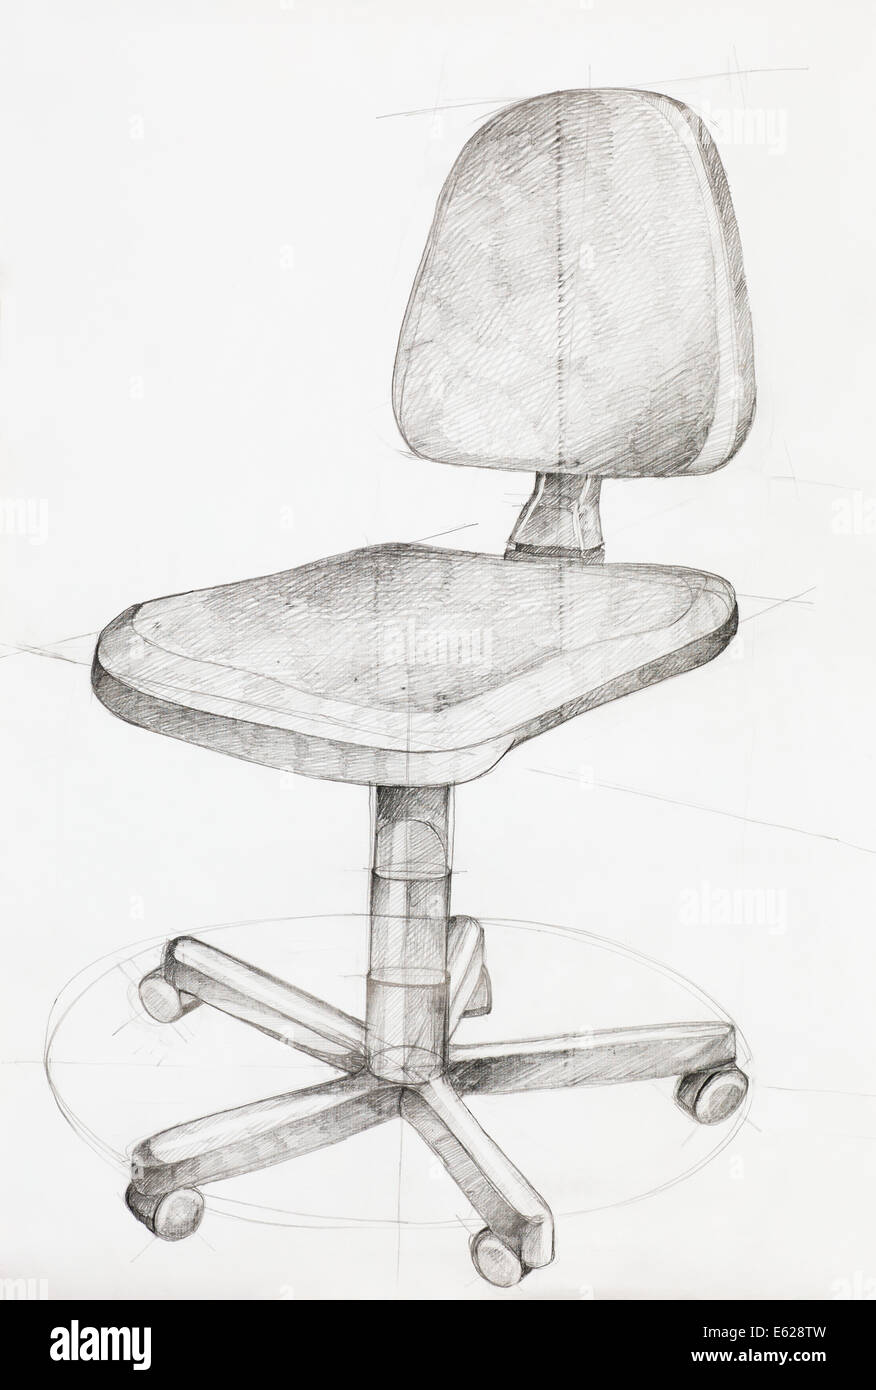 Hand Drawn Illustration Of Office Chair Perspective View Stock